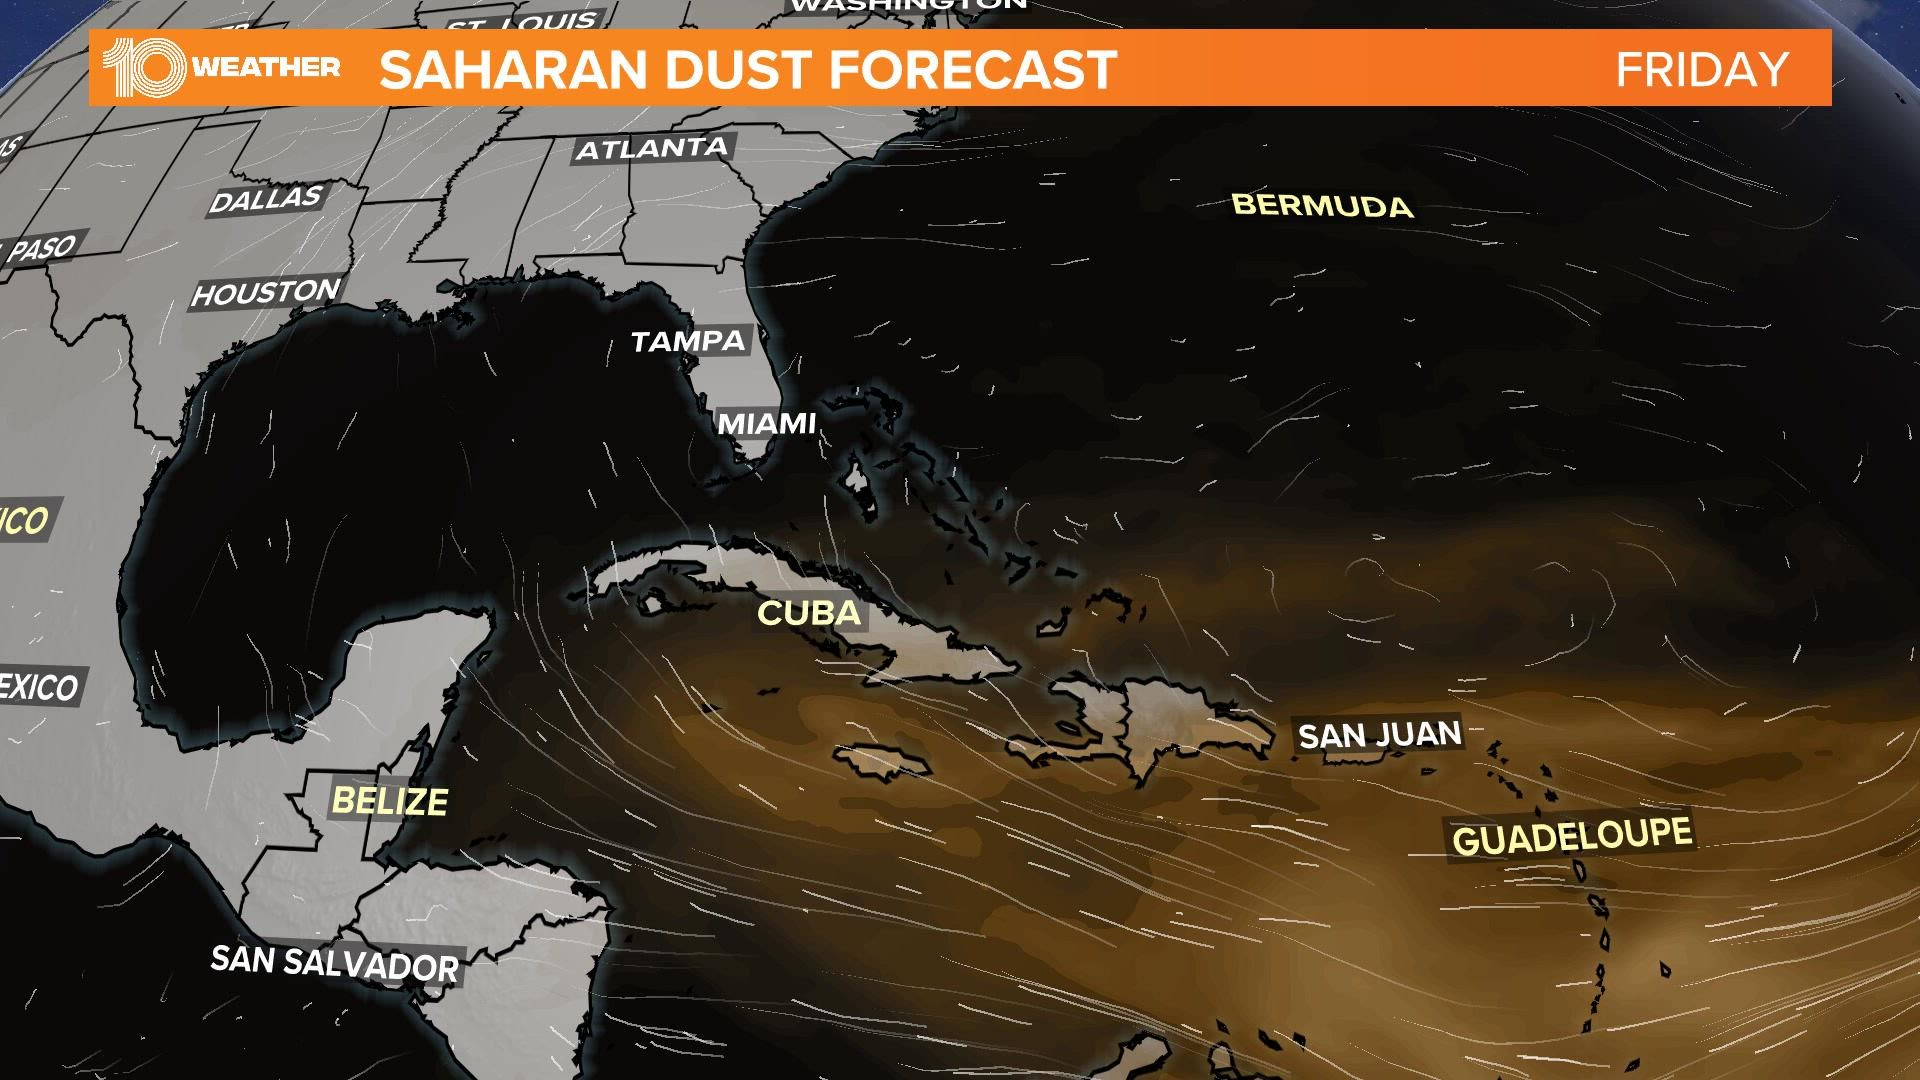 Saharan dust plume surges into parts of Florida this weekend